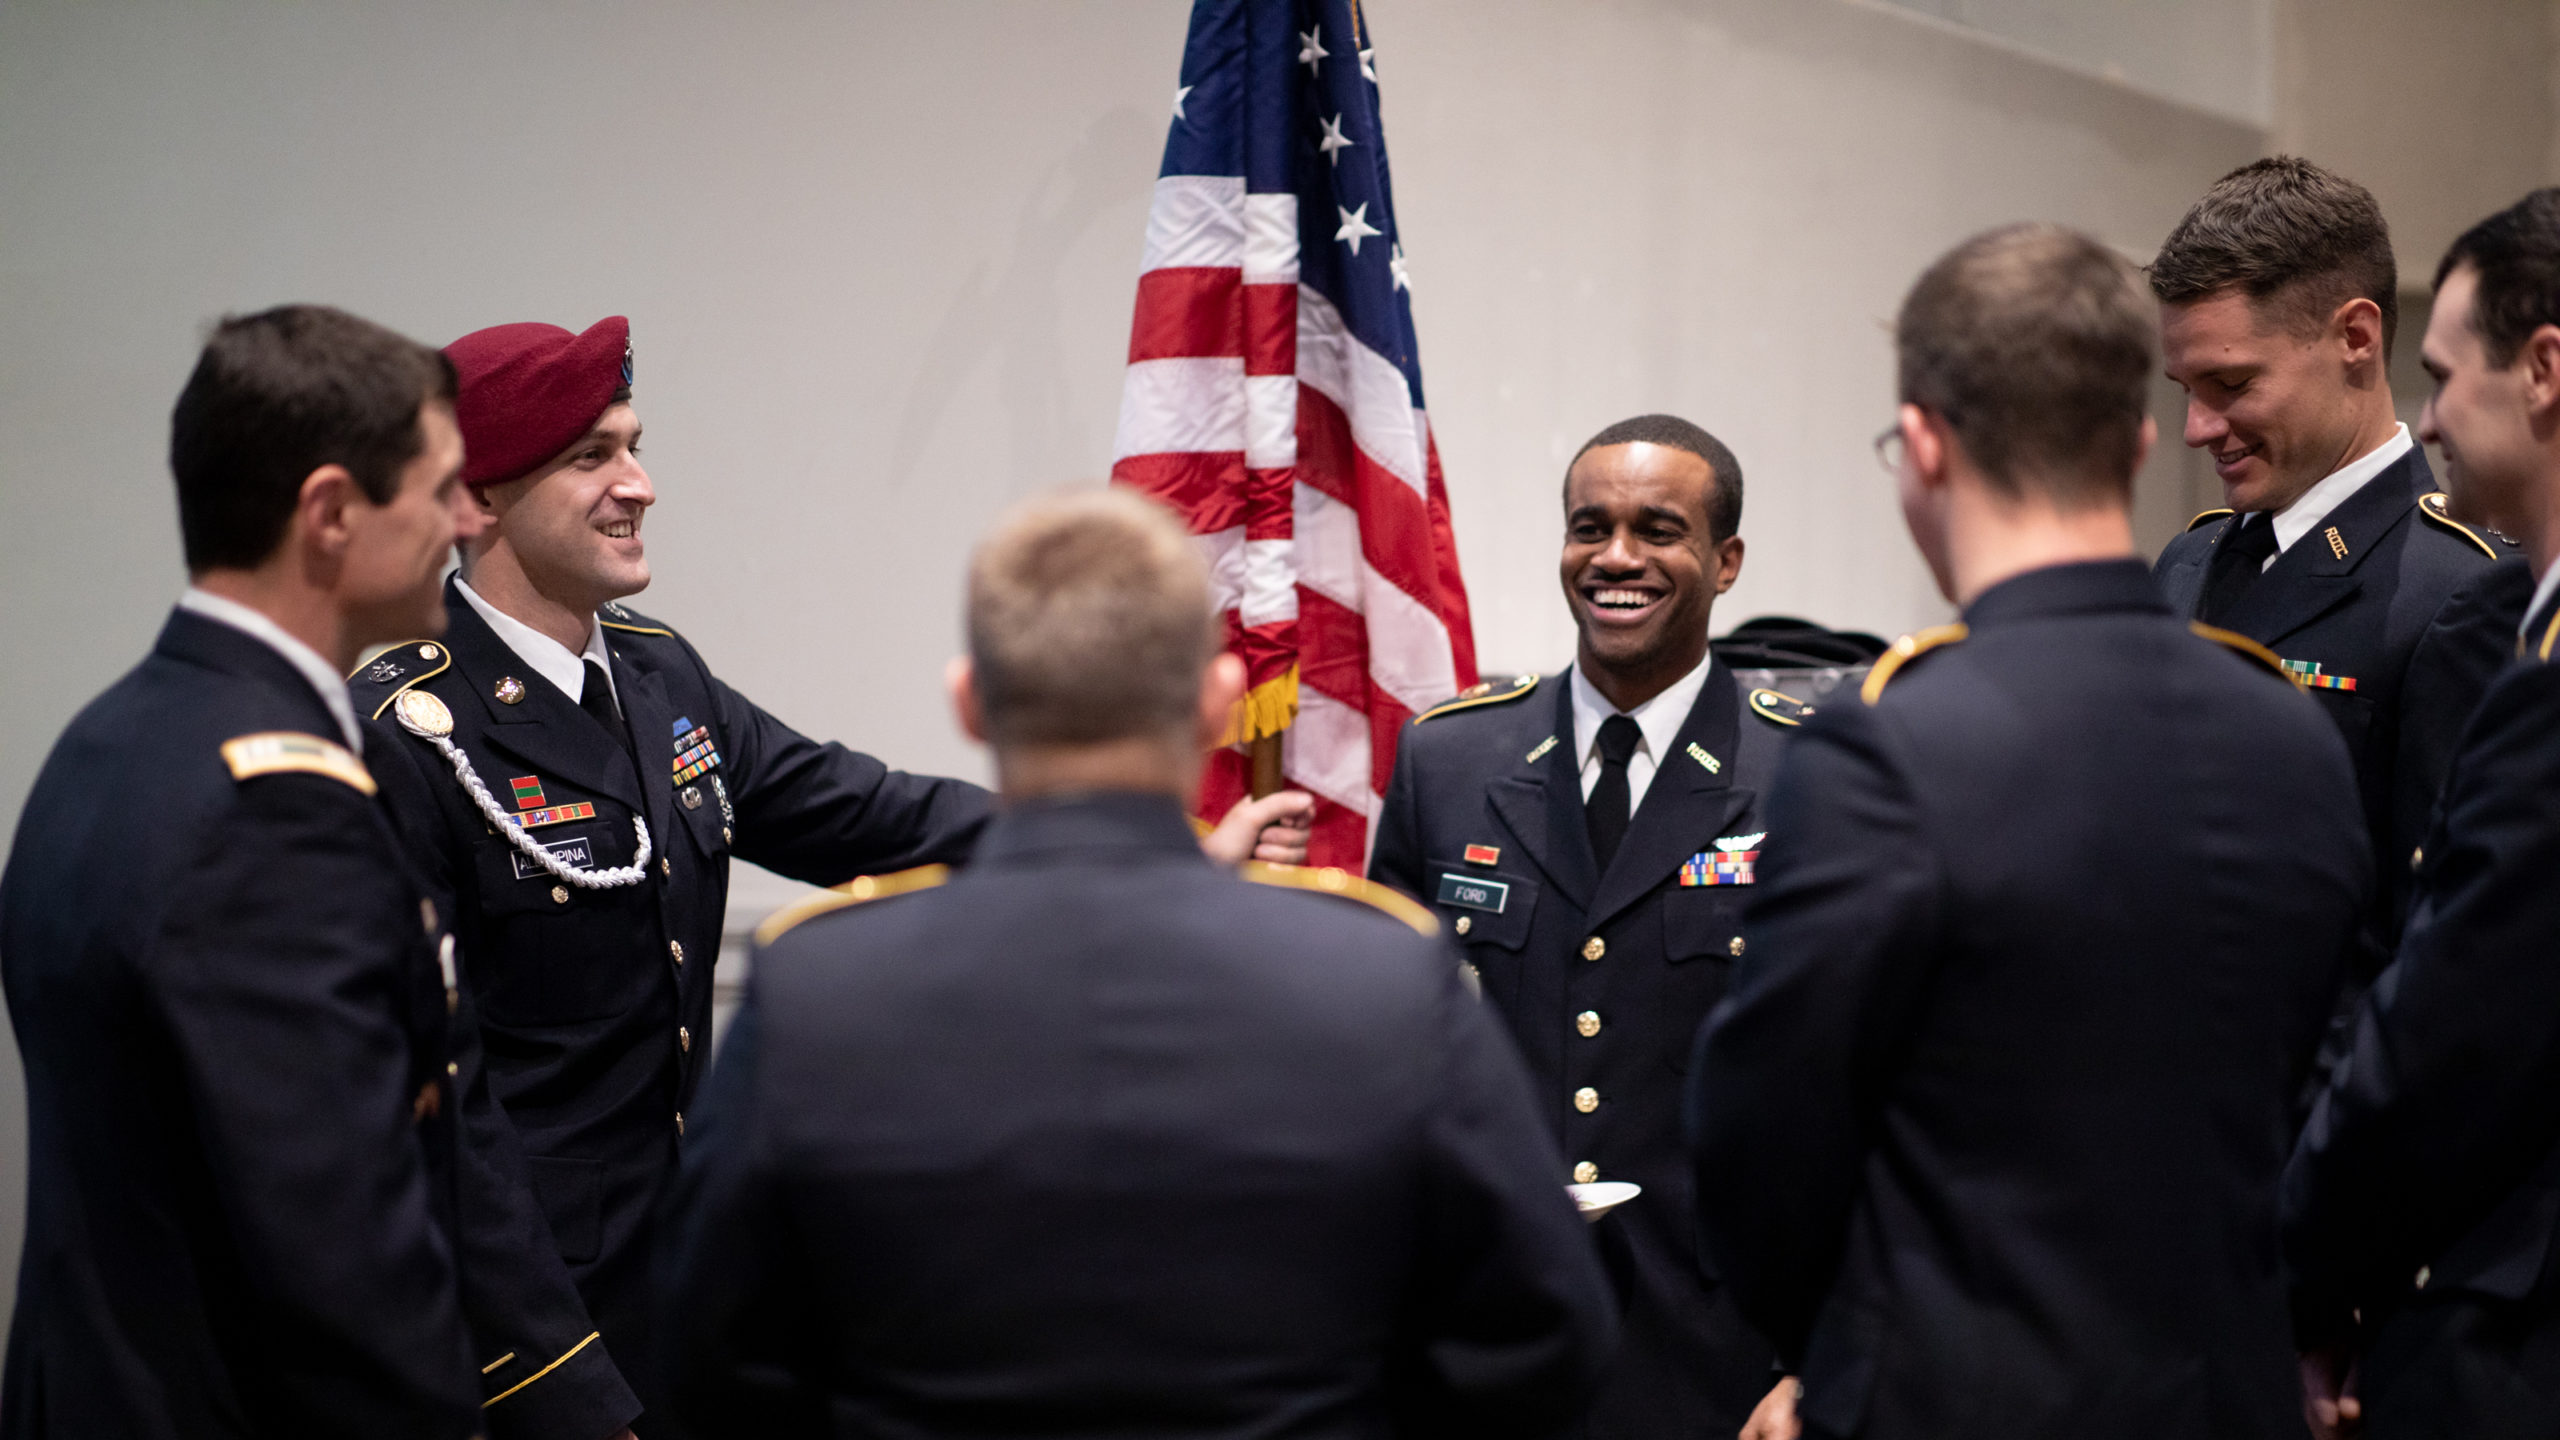 Veteran's Graduation, graduates dressed in military uniforms laughing in front of an American flag